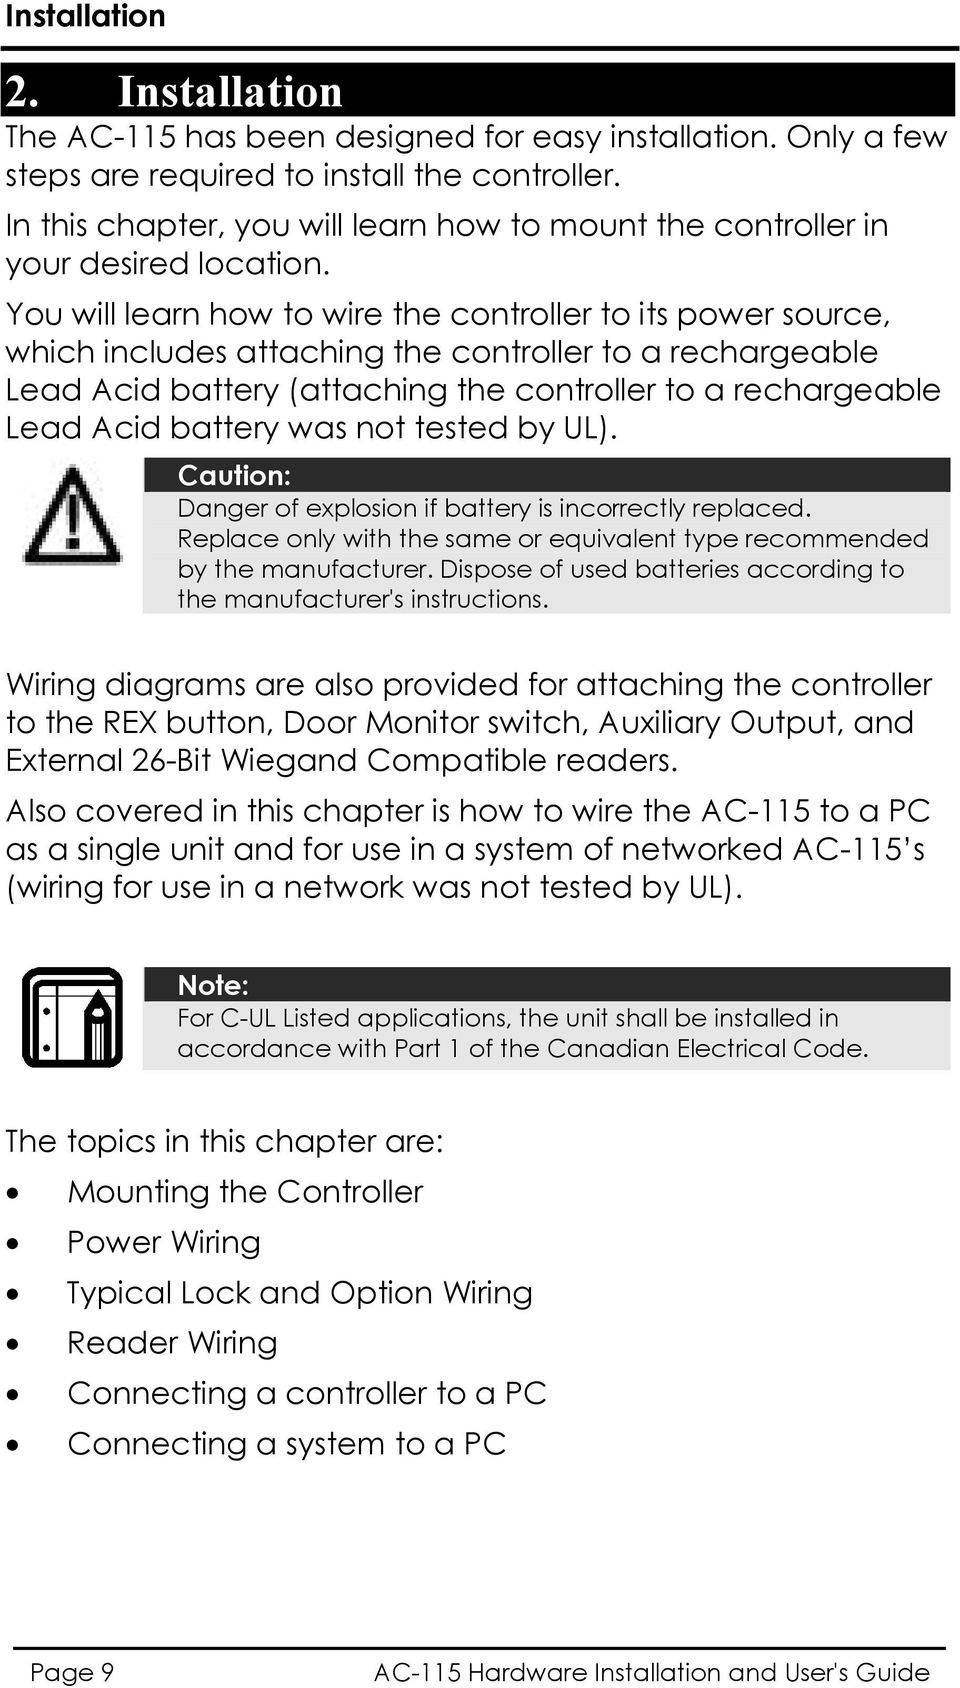 You will learn how to wire the controller to its power source, which includes attaching the controller to a rechargeable Lead Acid battery (attaching the controller to a rechargeable Lead Acid